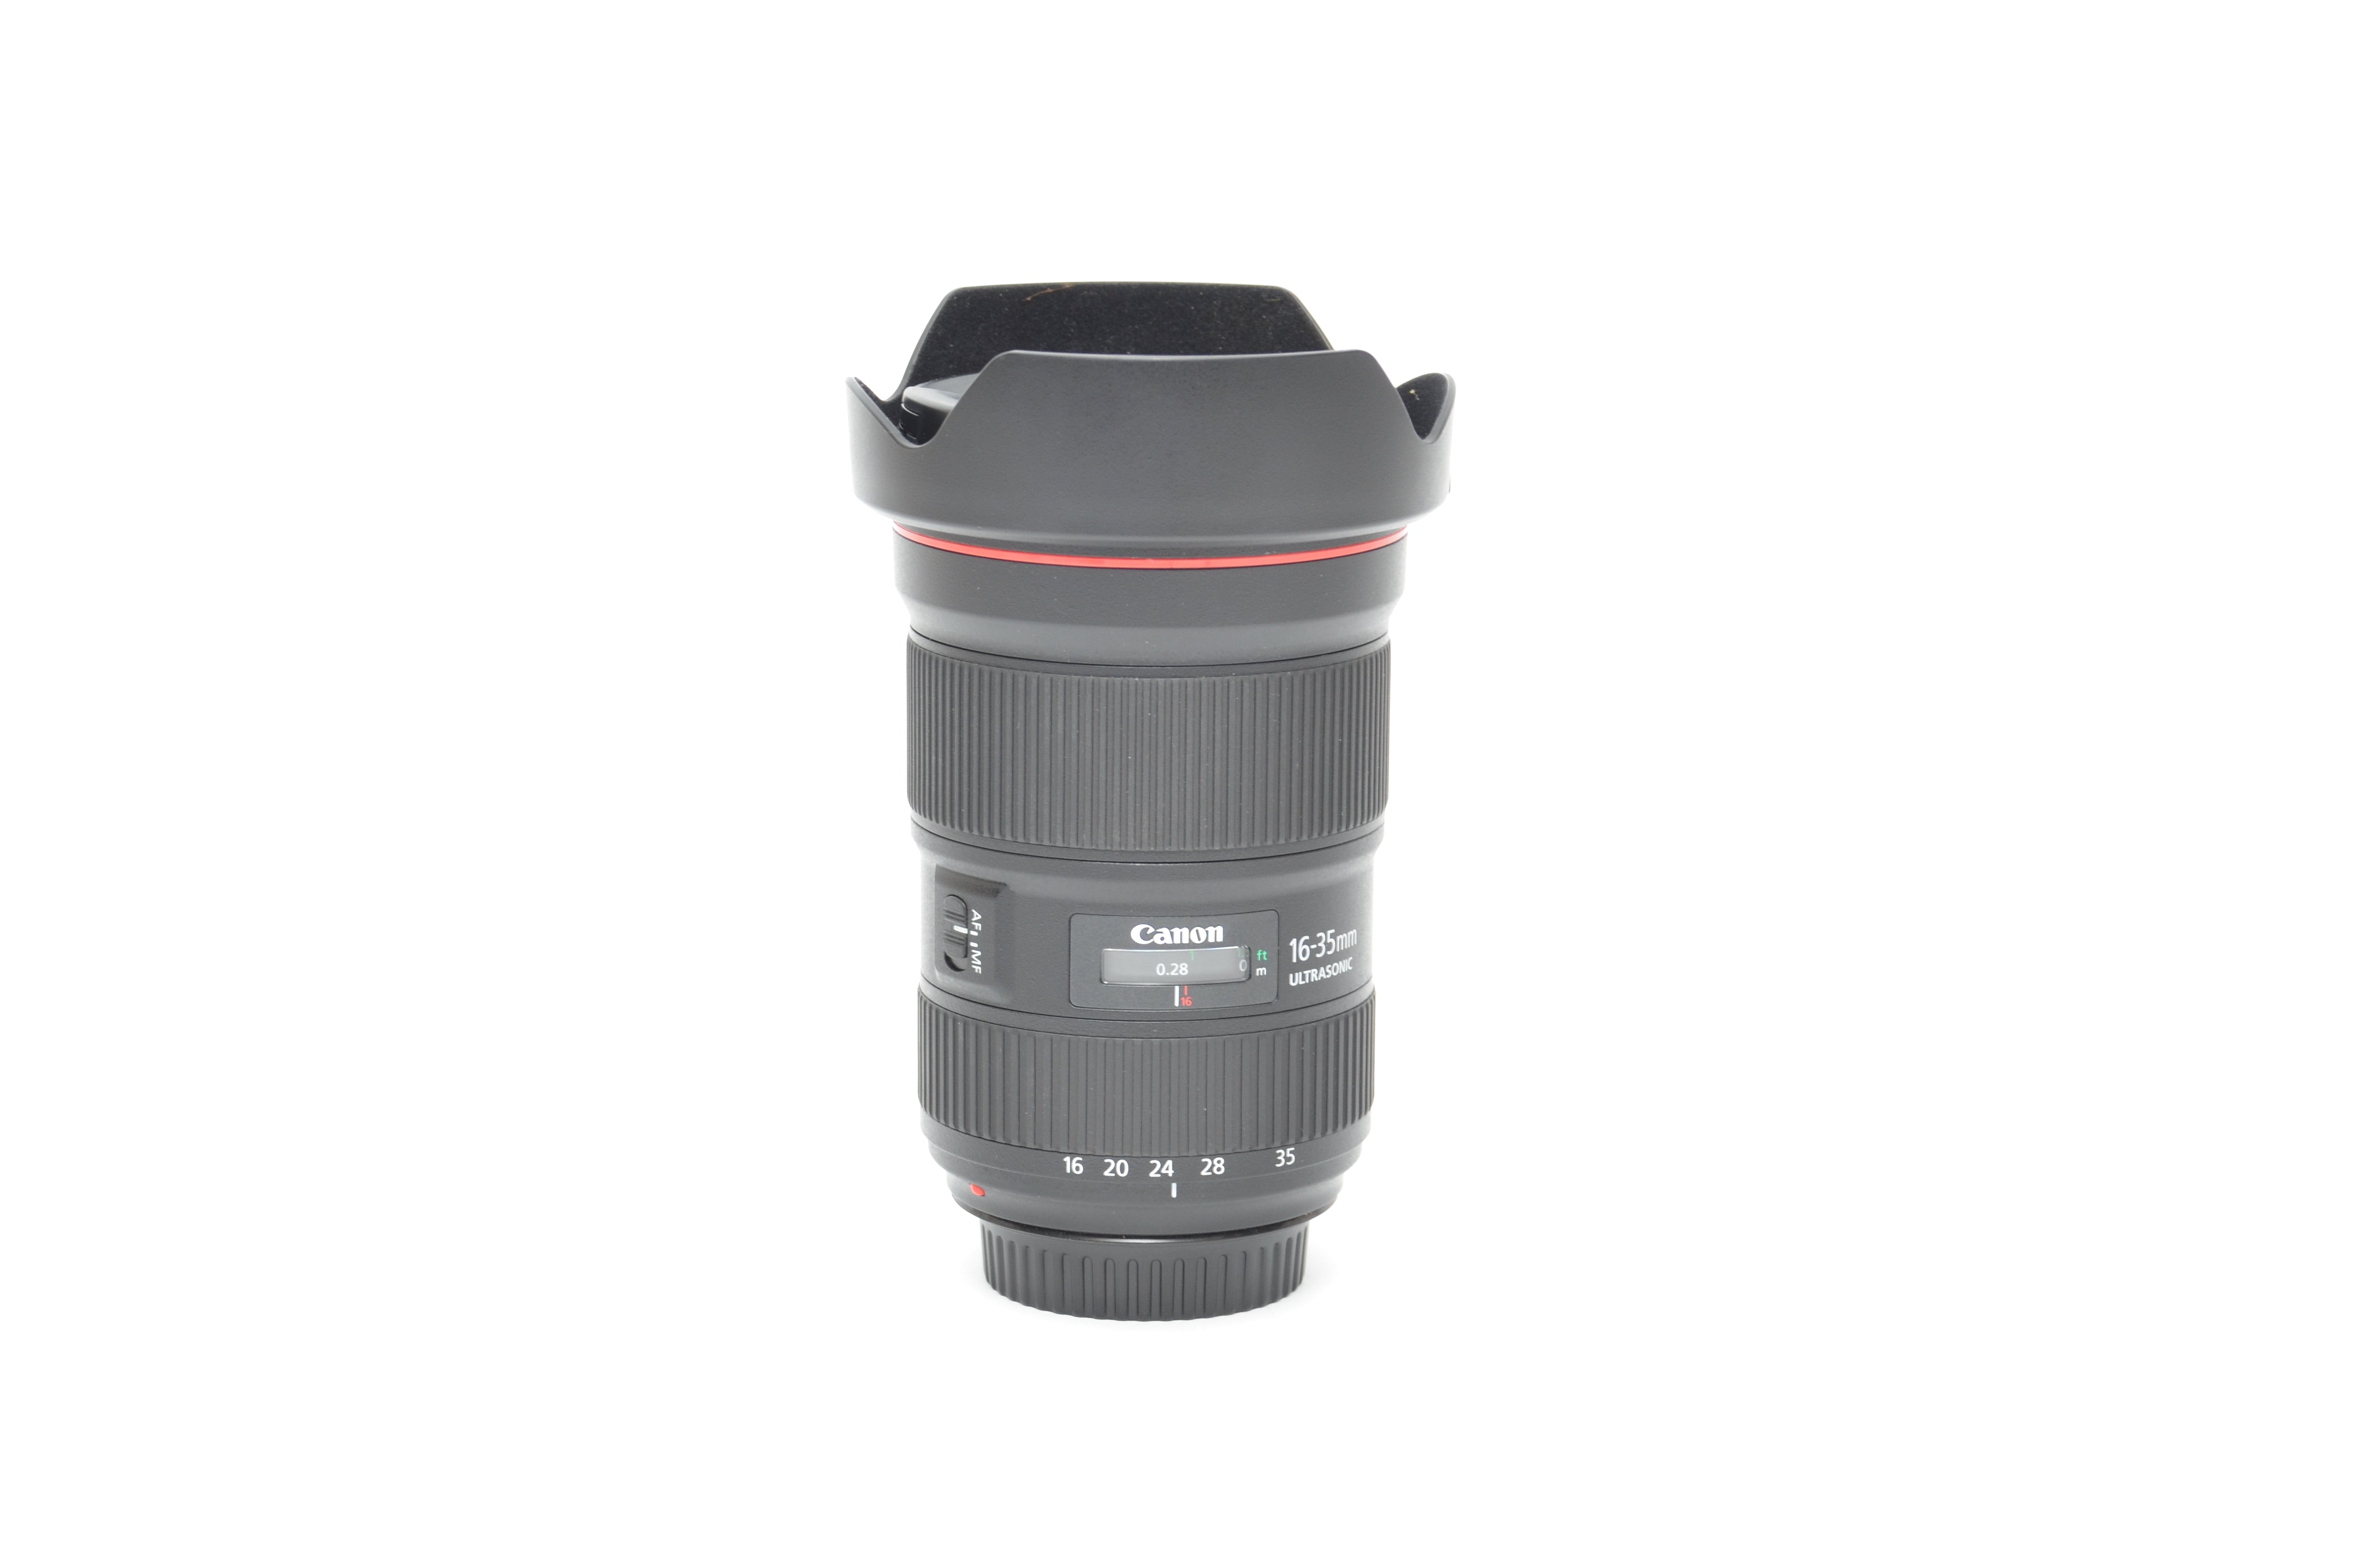 Used Canon 16-35mm f/2.8 L iii USM